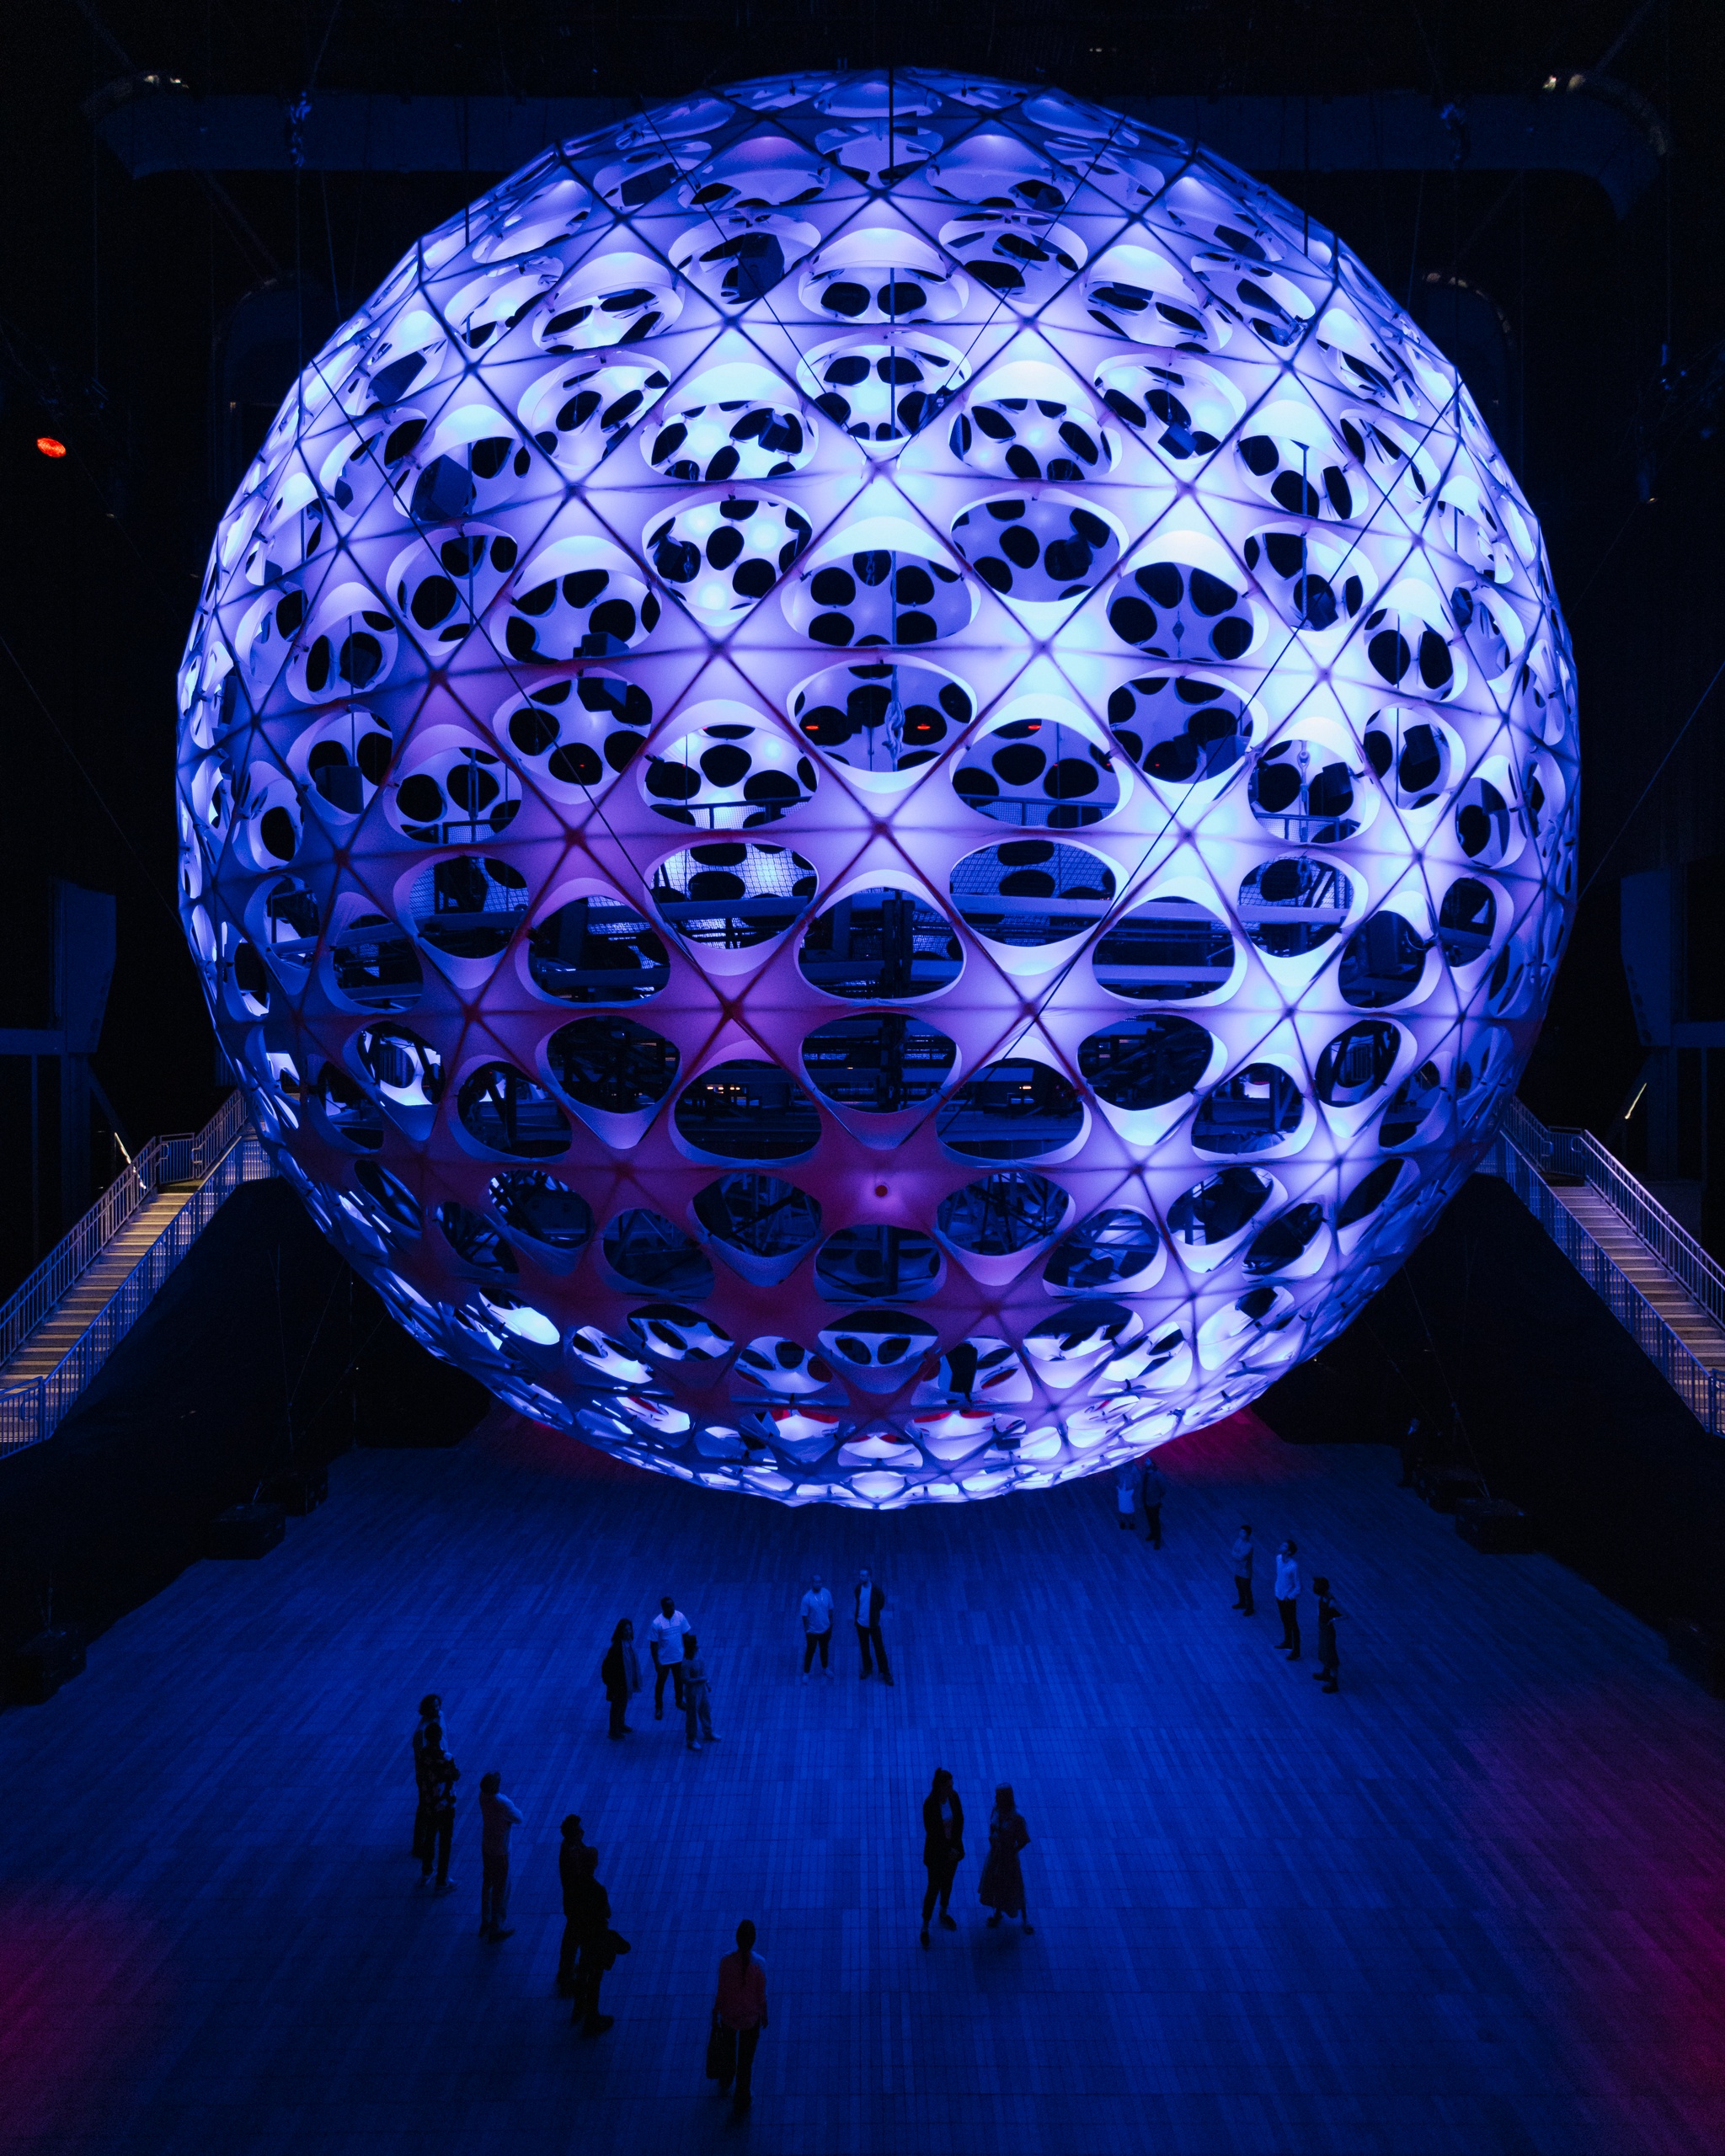 A large spherical structure hangs from a 115-foot-tall ceiling above roughly 20 people who stand below it. The sphere is dotted with light nodes that emanate a purplish blue light. The people are small figures beneath the enormous sphere.